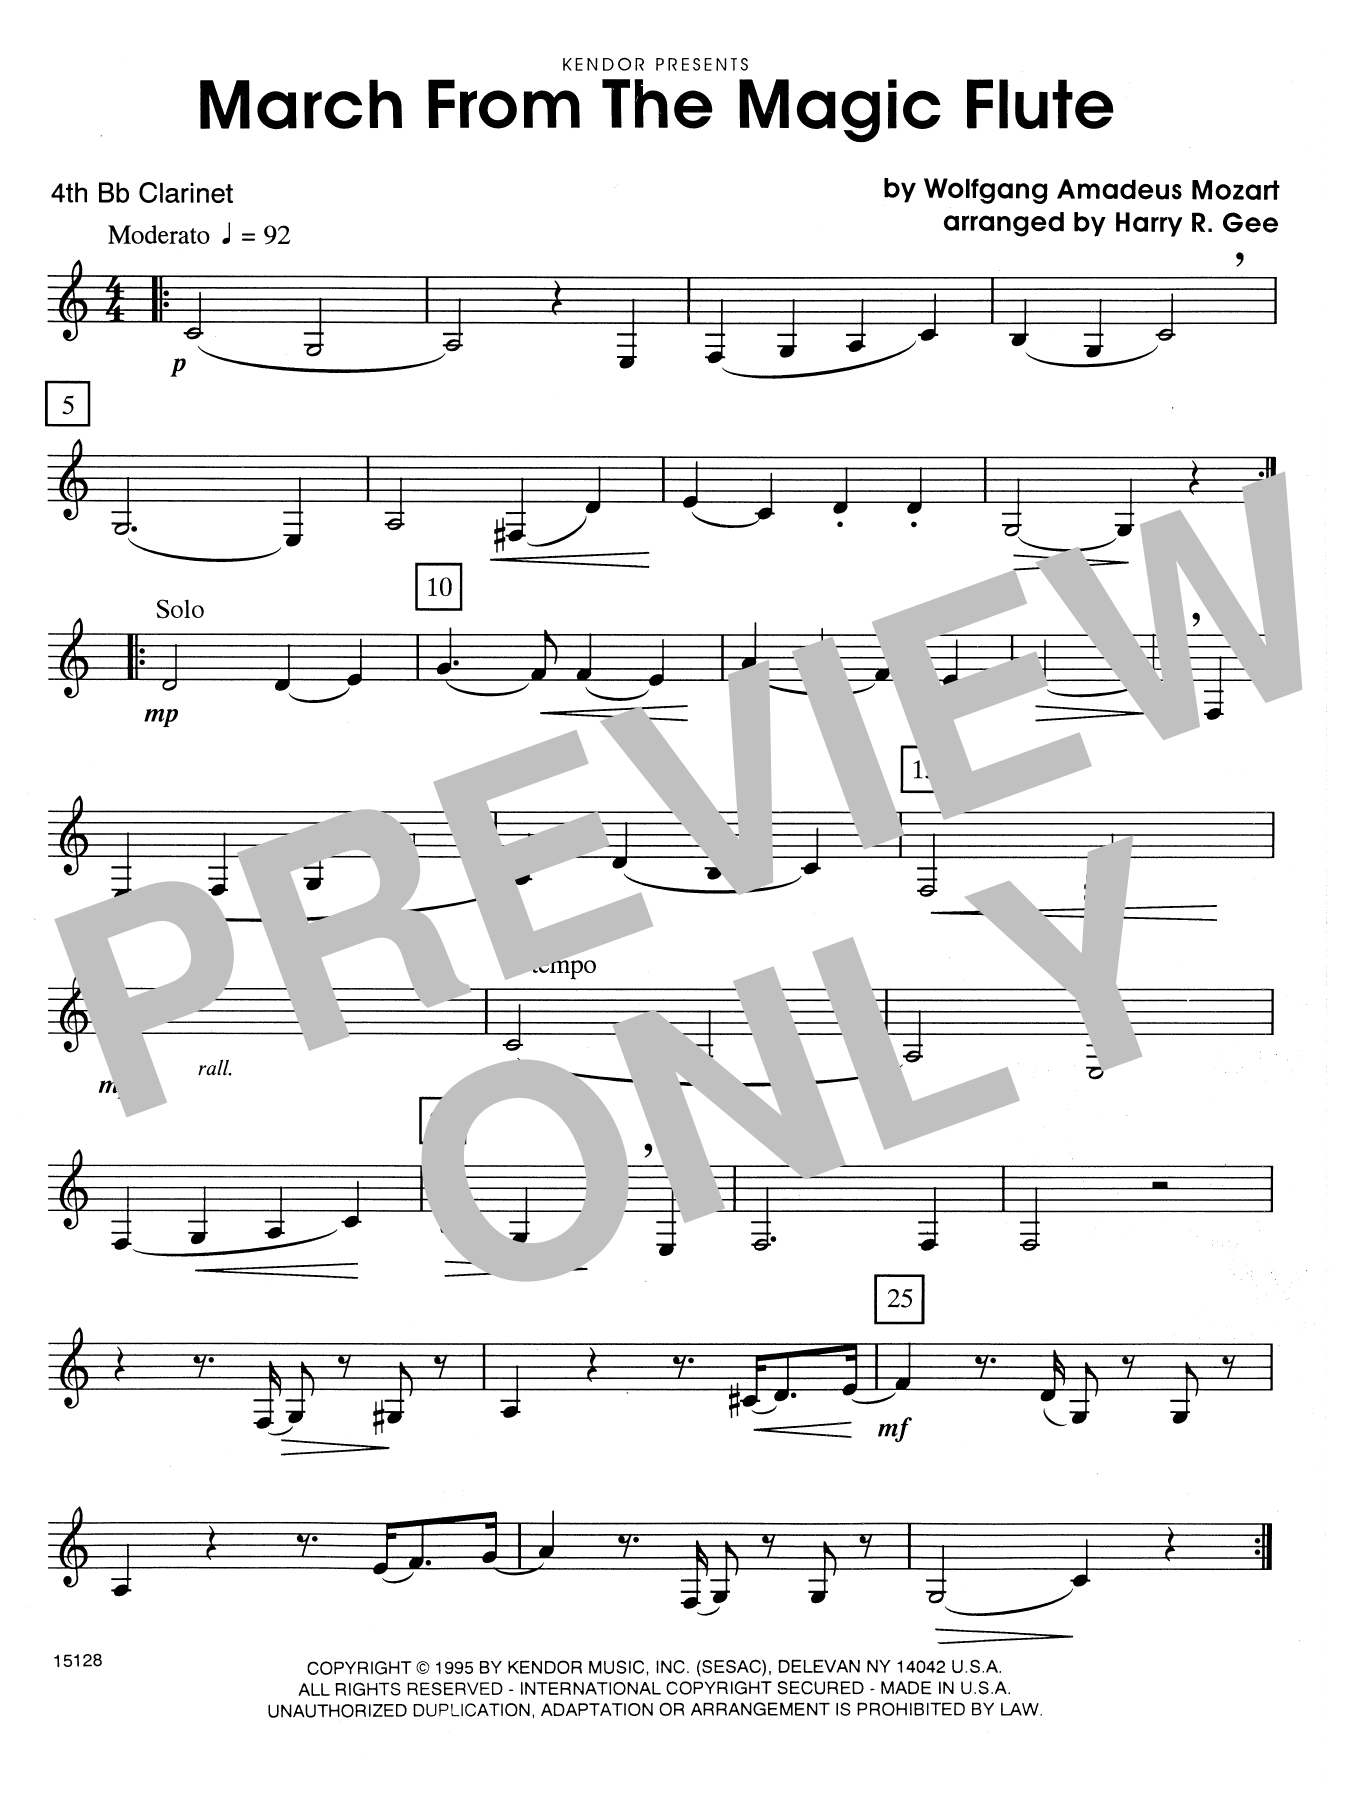 Download Harry R. Gee March From The Magic Flute - 4th Bb Cla Sheet Music